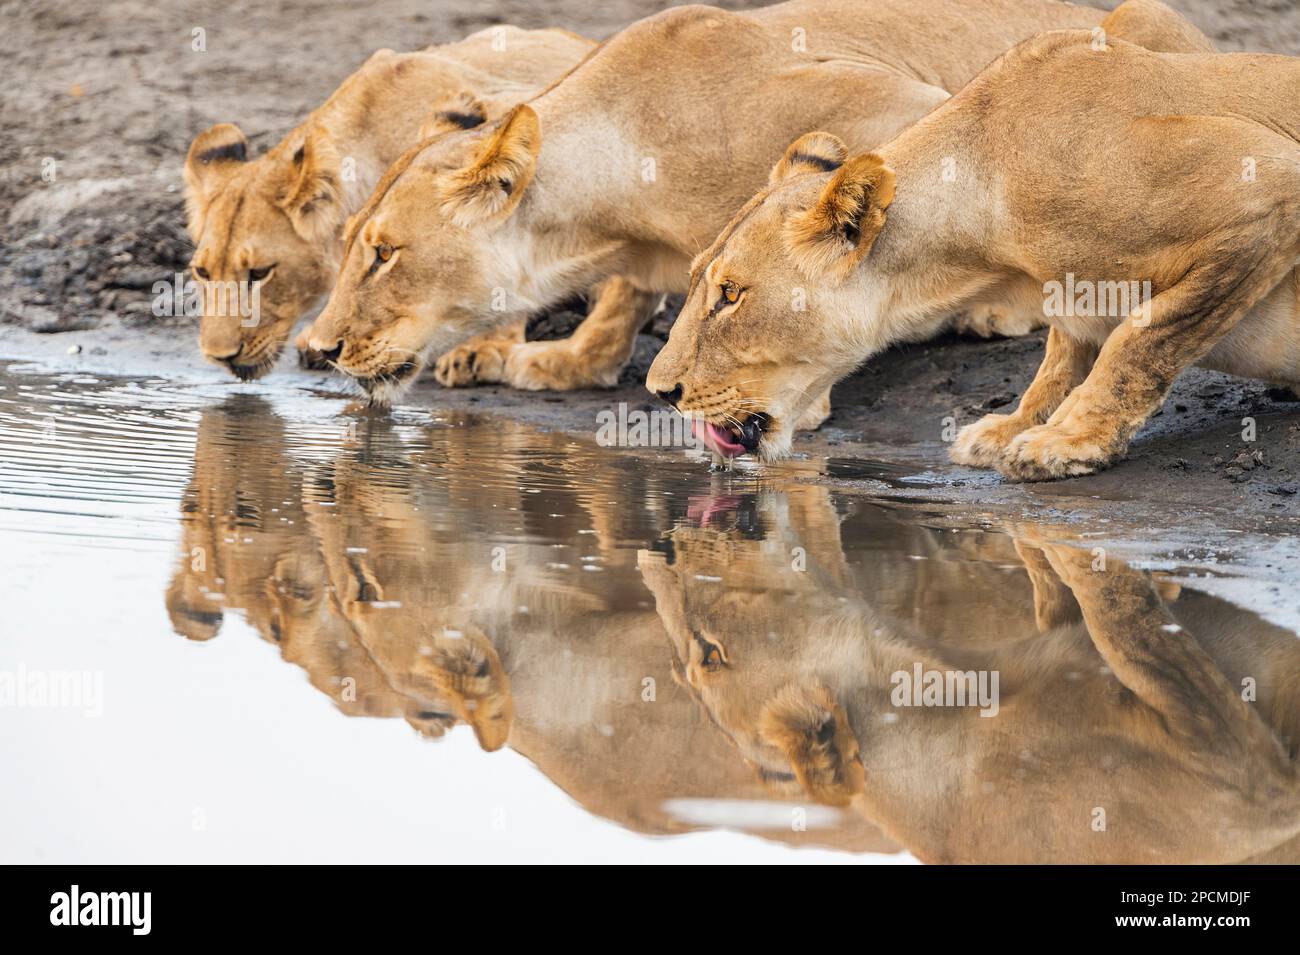 A pride of lion, Panther Leo, drinking from a waterhole in Zimbabwe's Hwange National park. Stock Photo